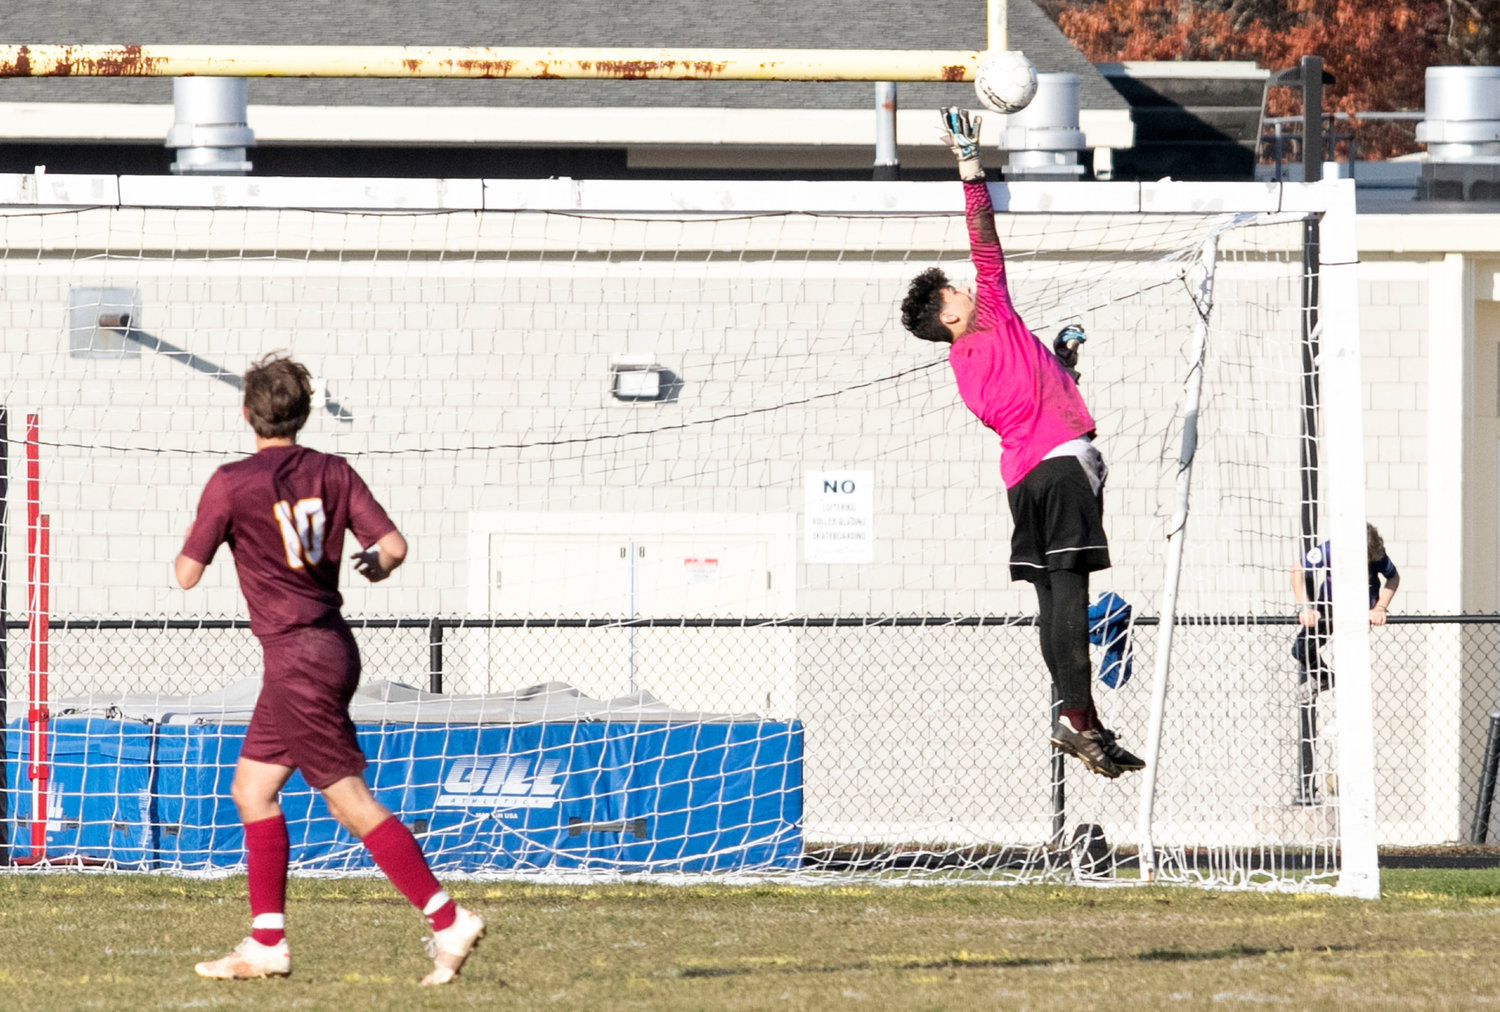 Sama makes a save and sends a shot over the crossbar in the second half.